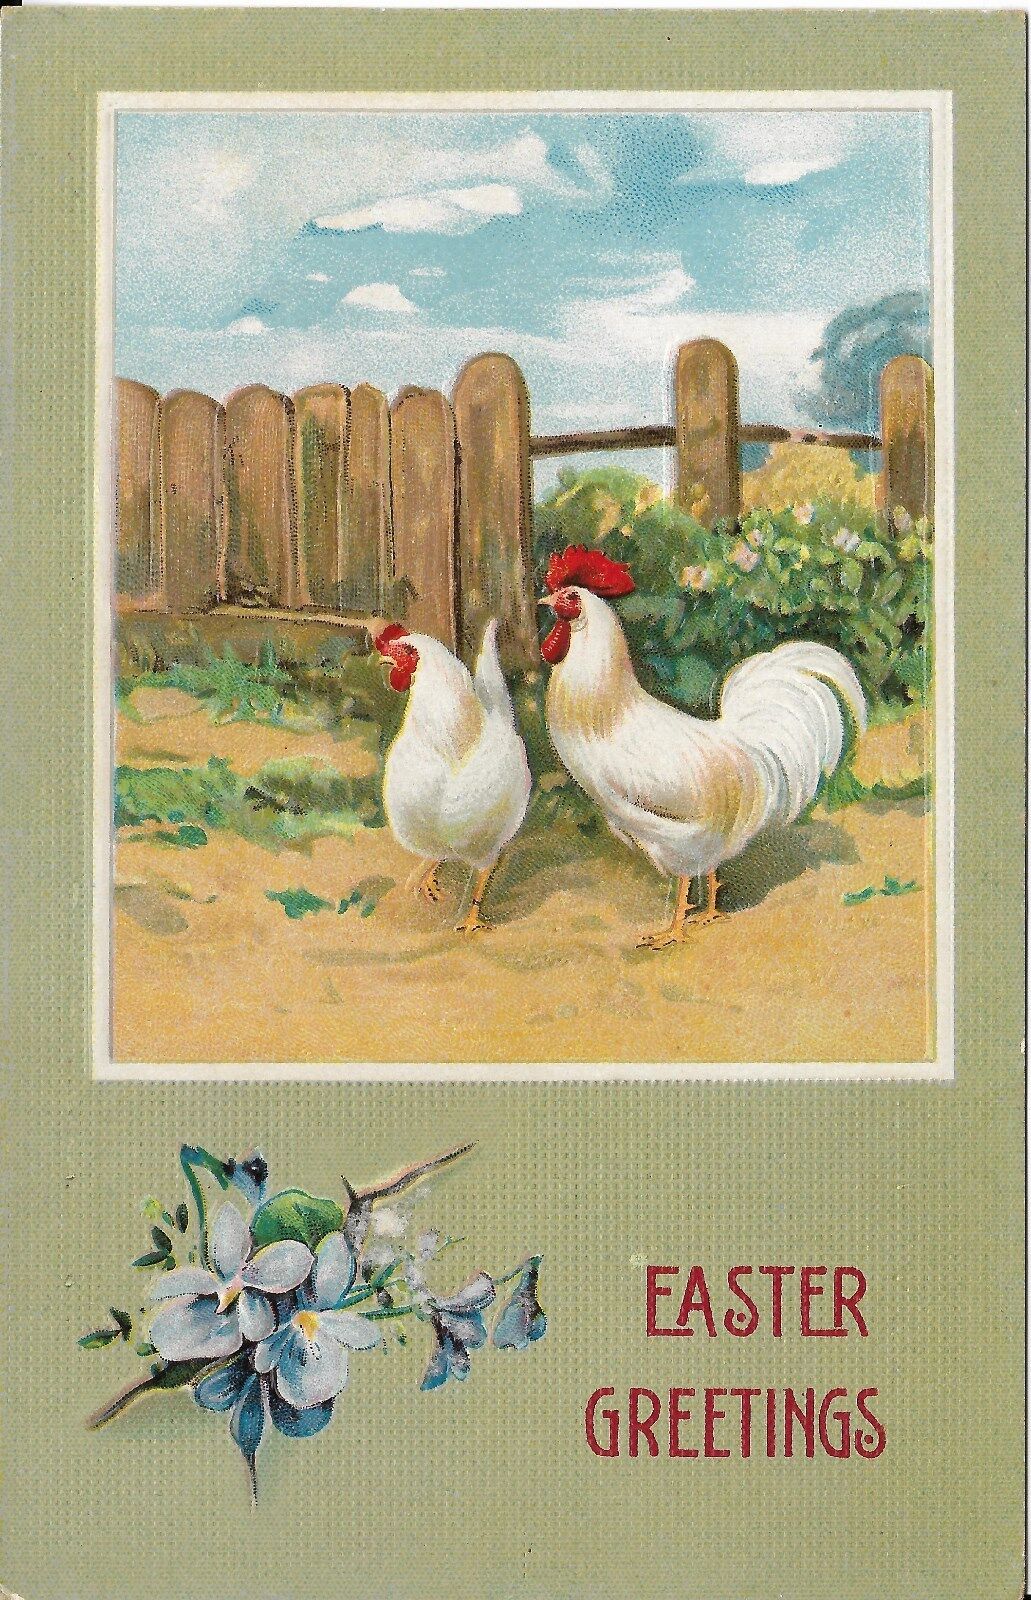 Antique Postcard Easter Greetings, Hen and Rooster in Farmyard, Maybe Linen?